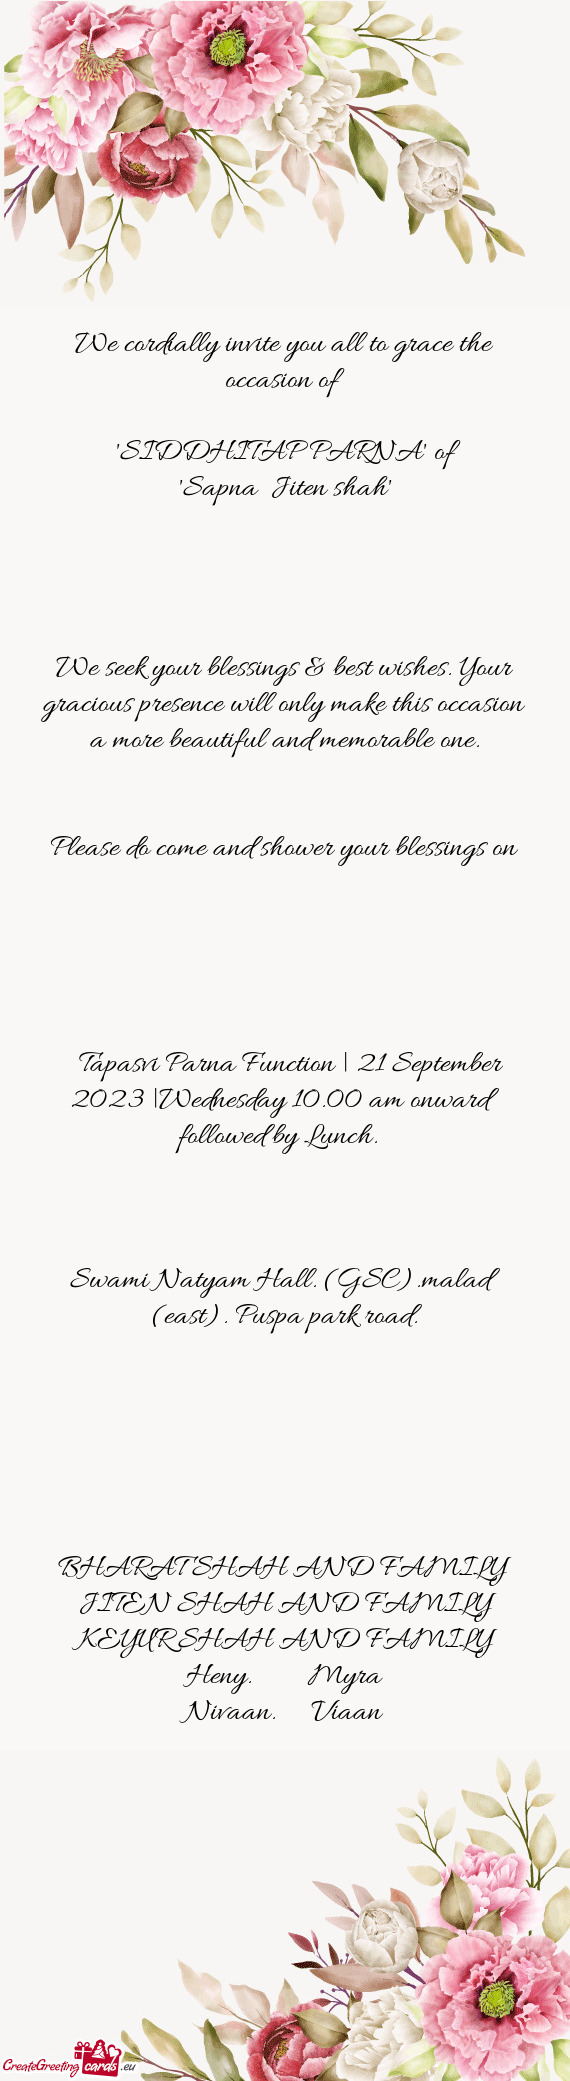 Tapasvi Parna Function | 21 September 2023 |Wednesday 10.00 am onward followed by Lunch